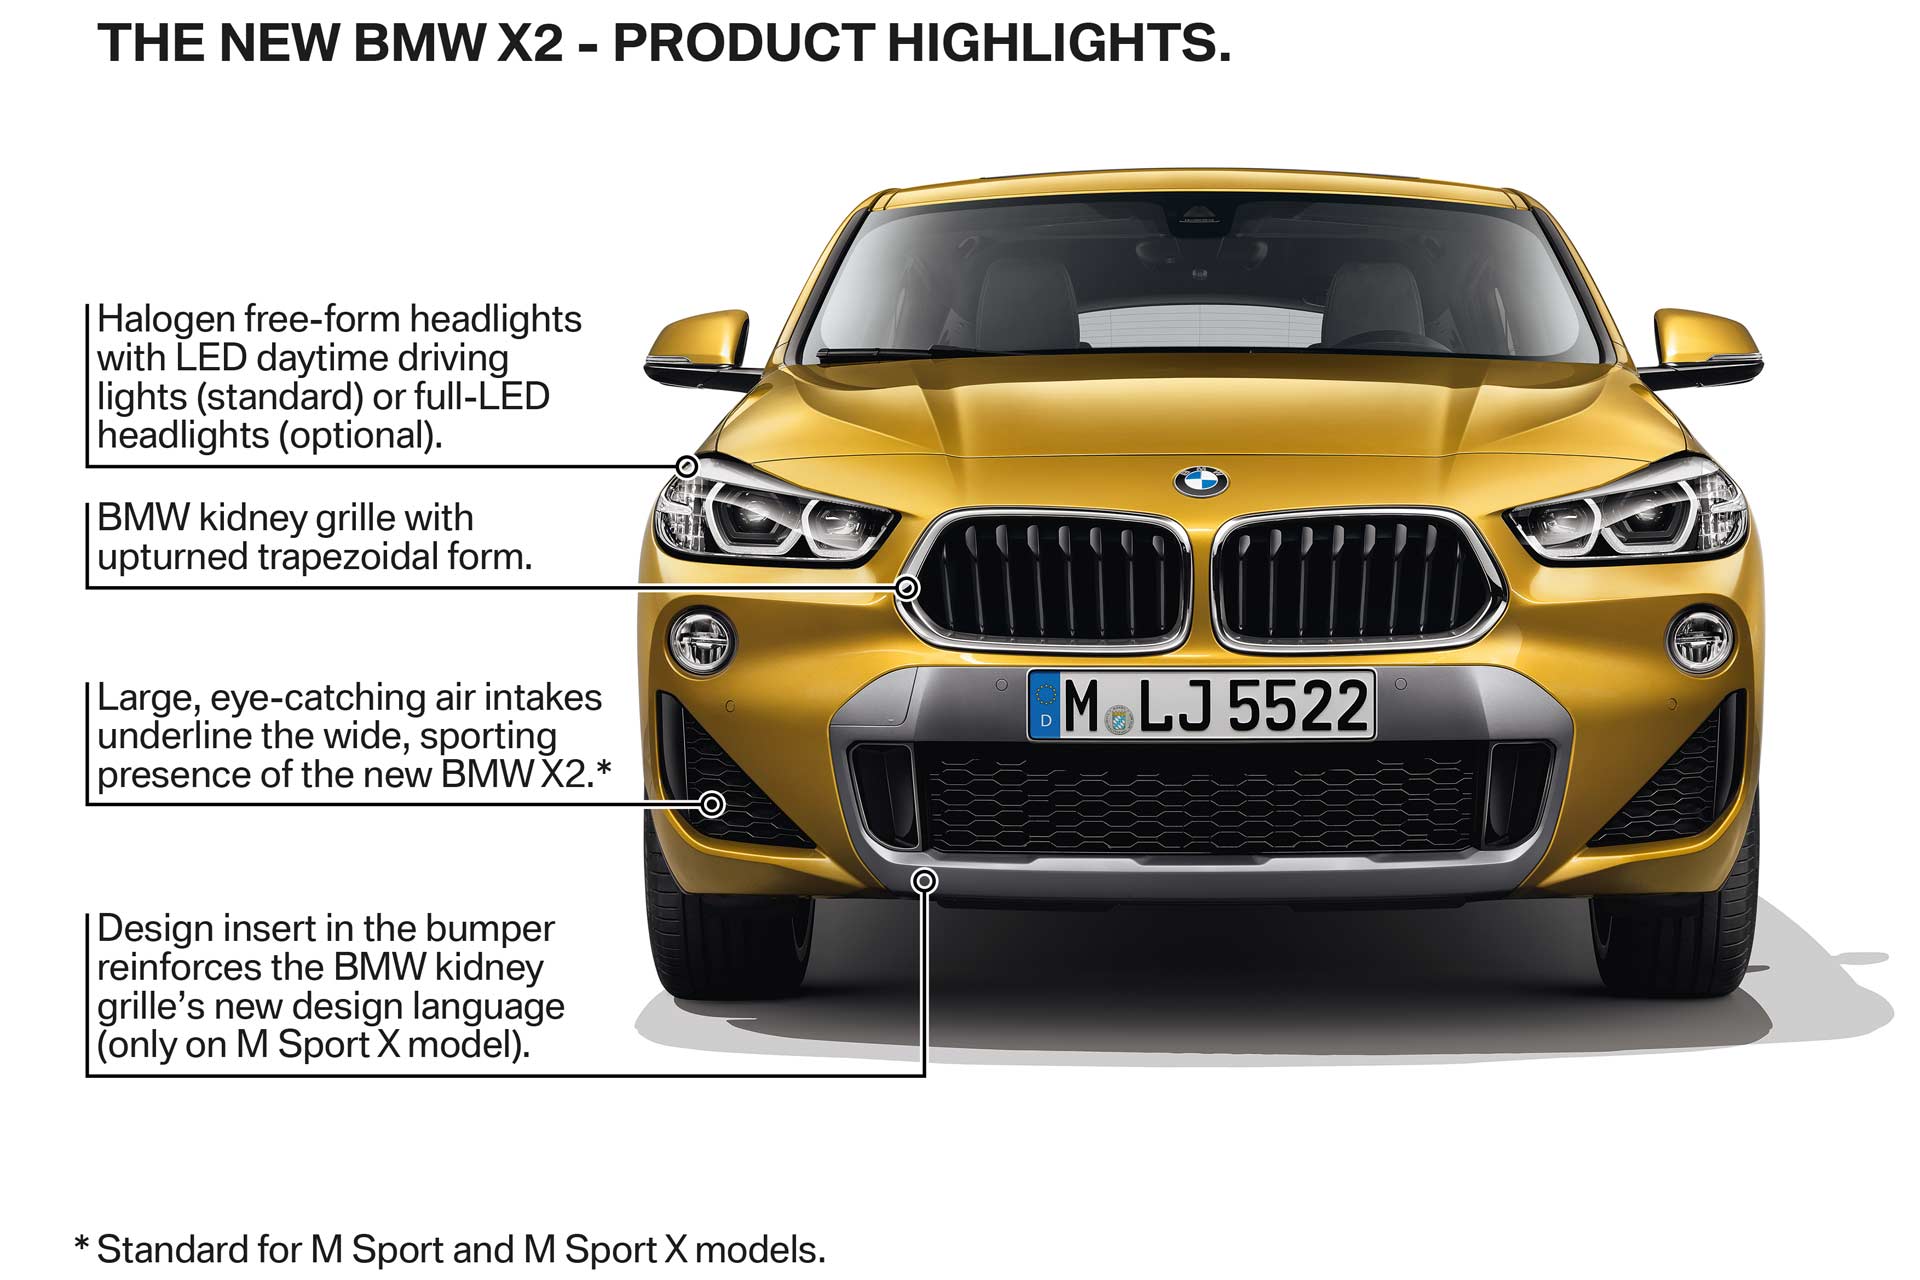 2018-BMW-X2-product-highlights